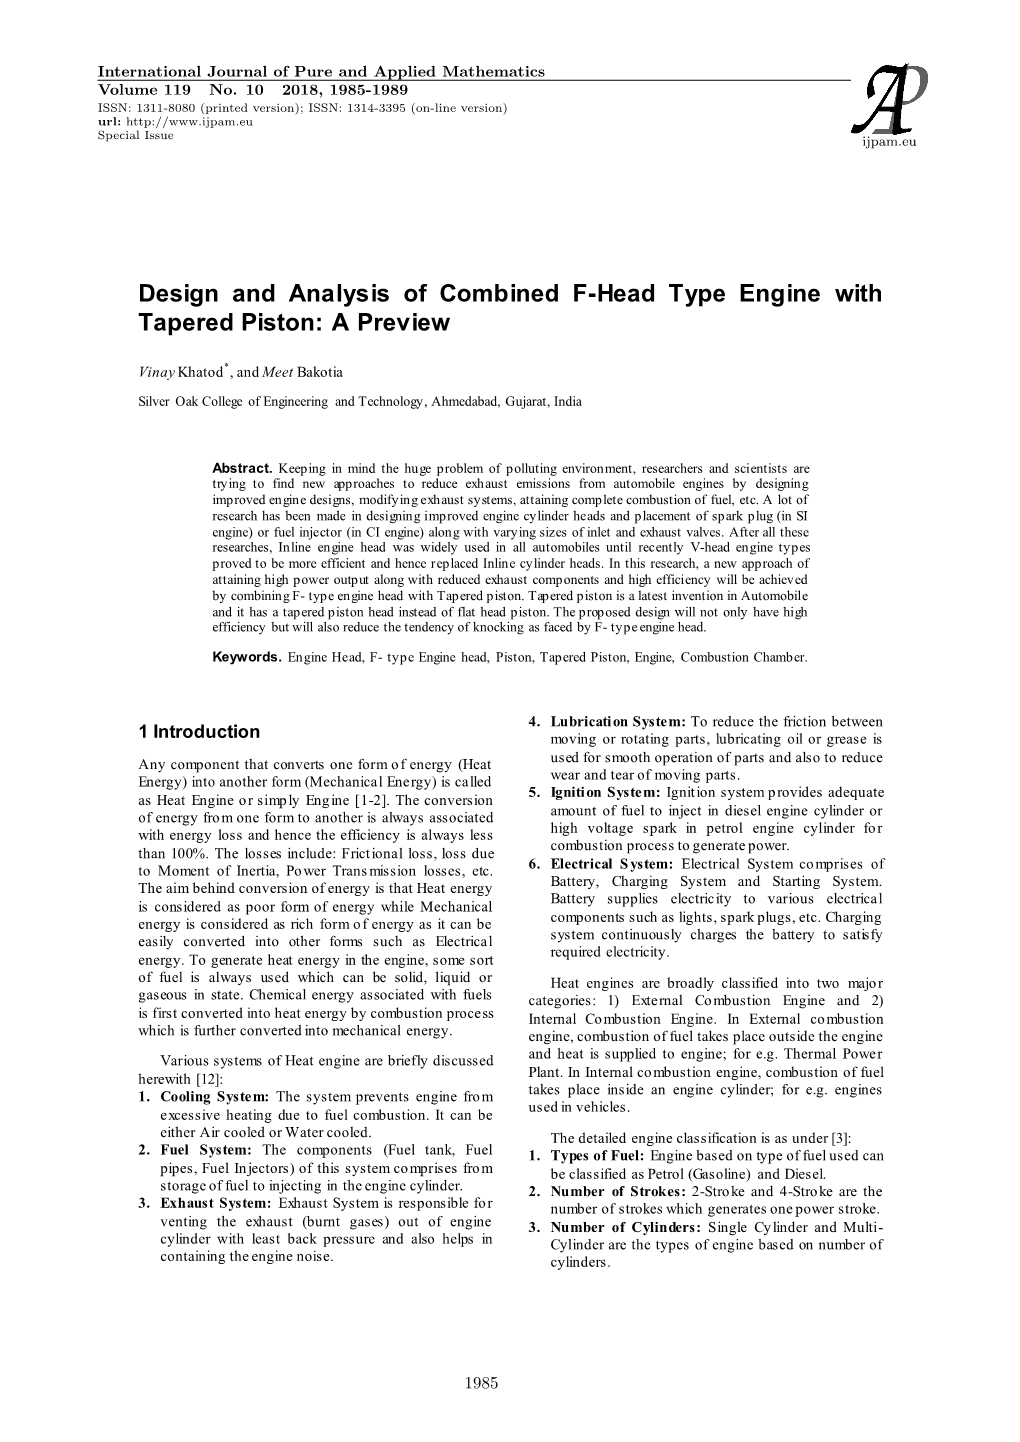 Design and Analysis of Combined F-Head Type Engine with Tapered Piston: a Preview